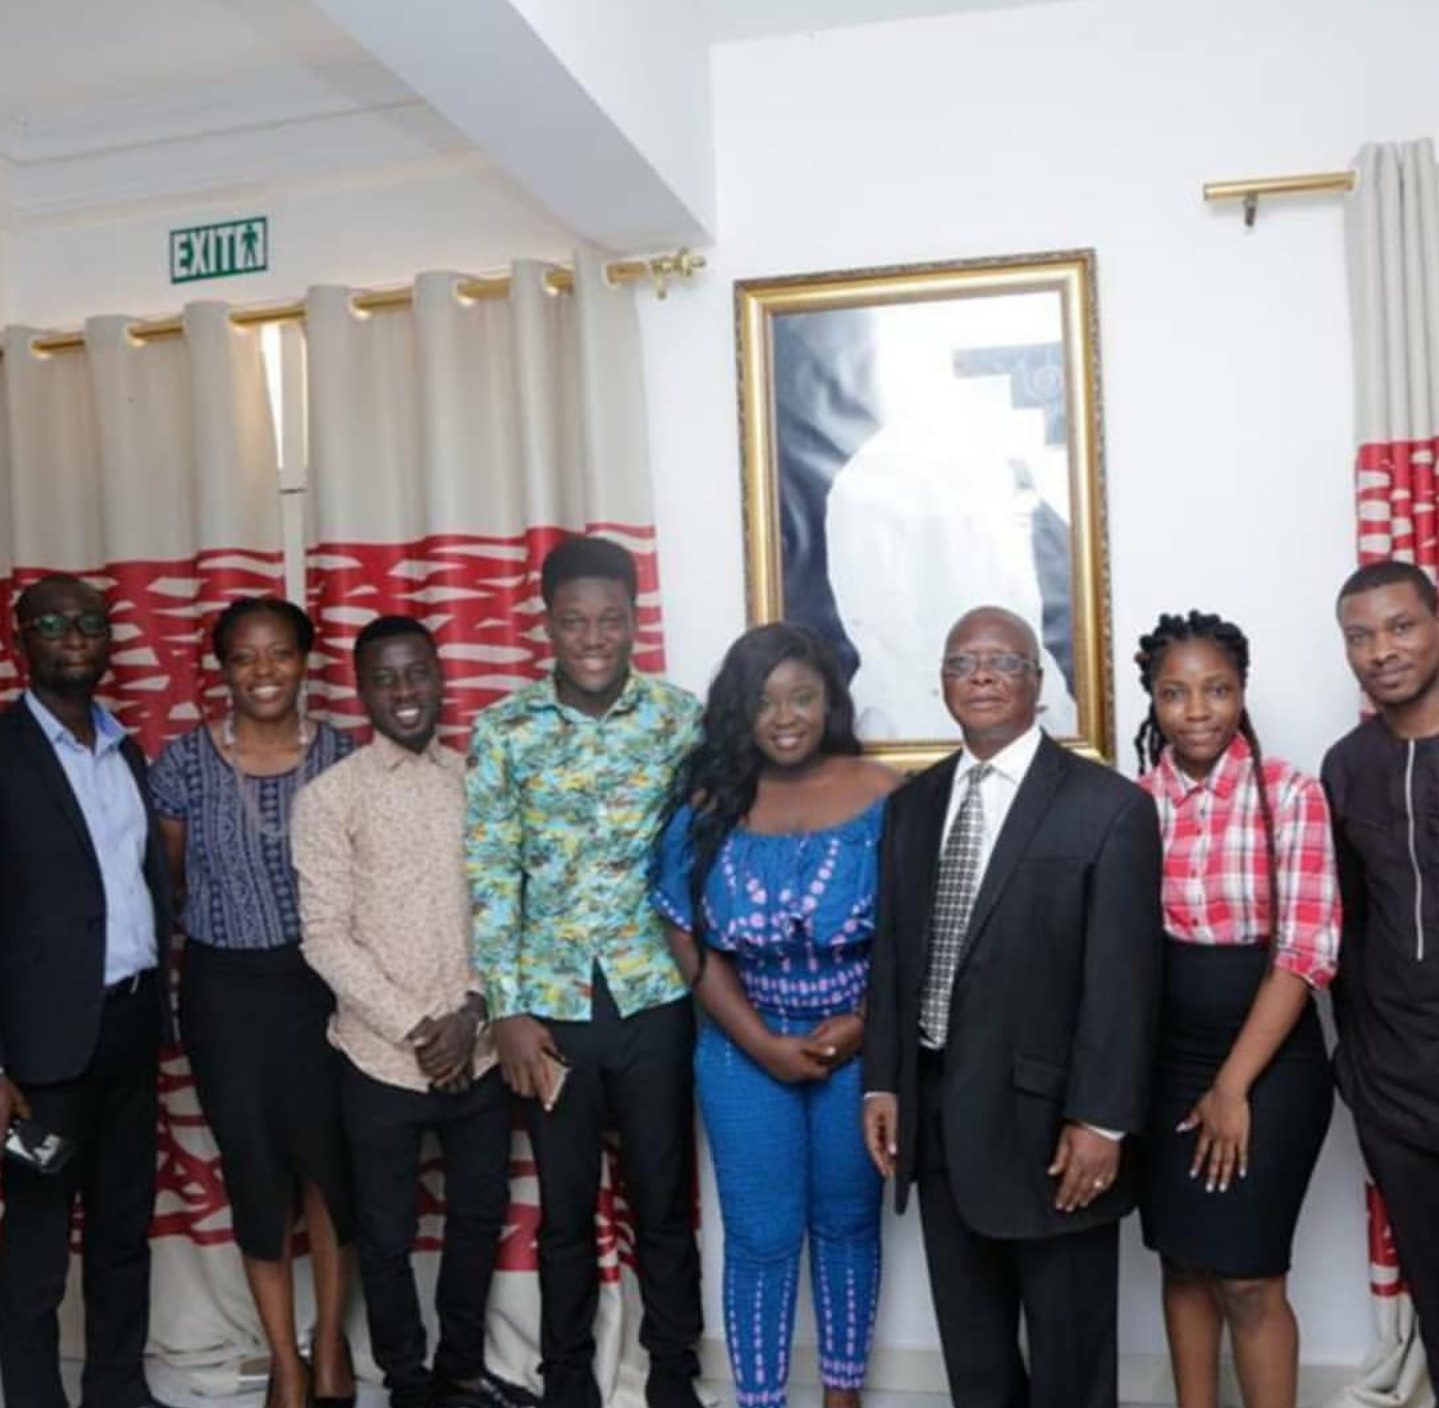 Maame Serwaa with her teams and Knutford University College officials